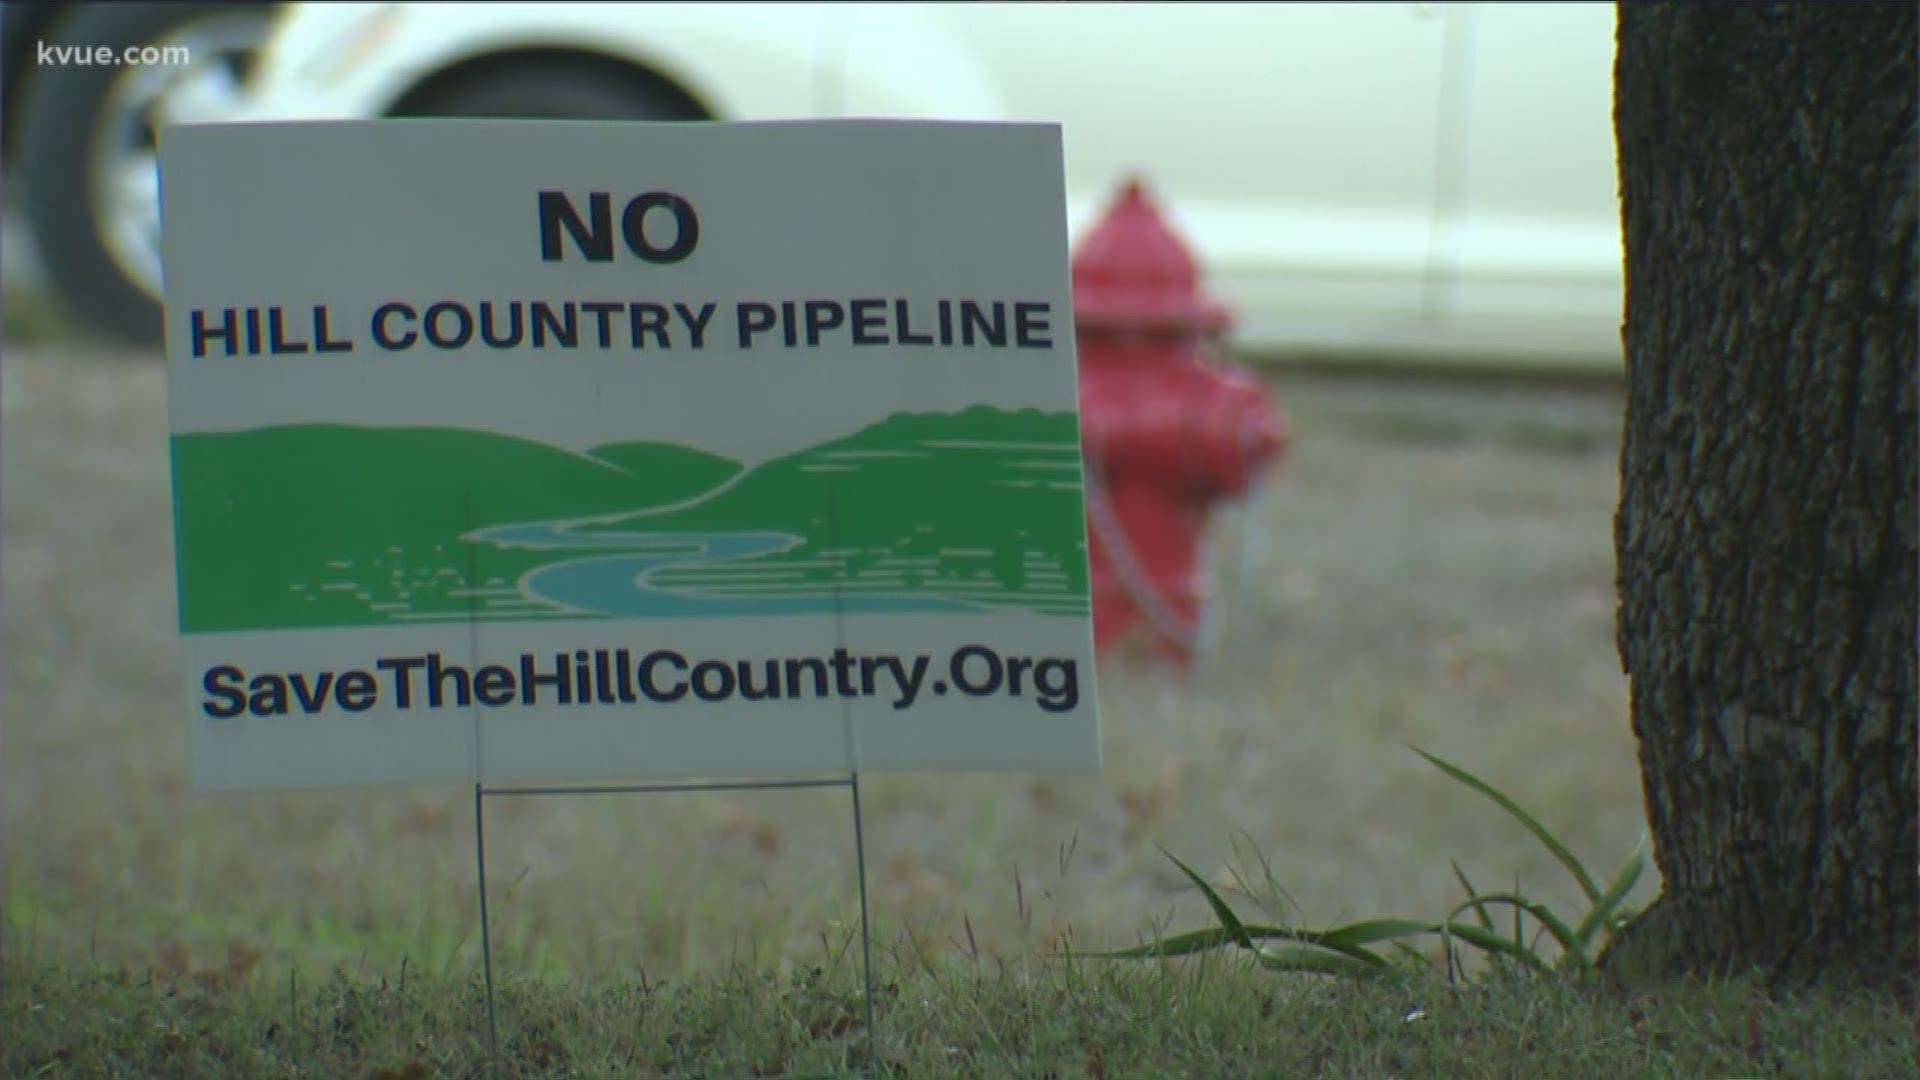 Hill Country neighbors hope construction on a natural gas pipeline won't happen.